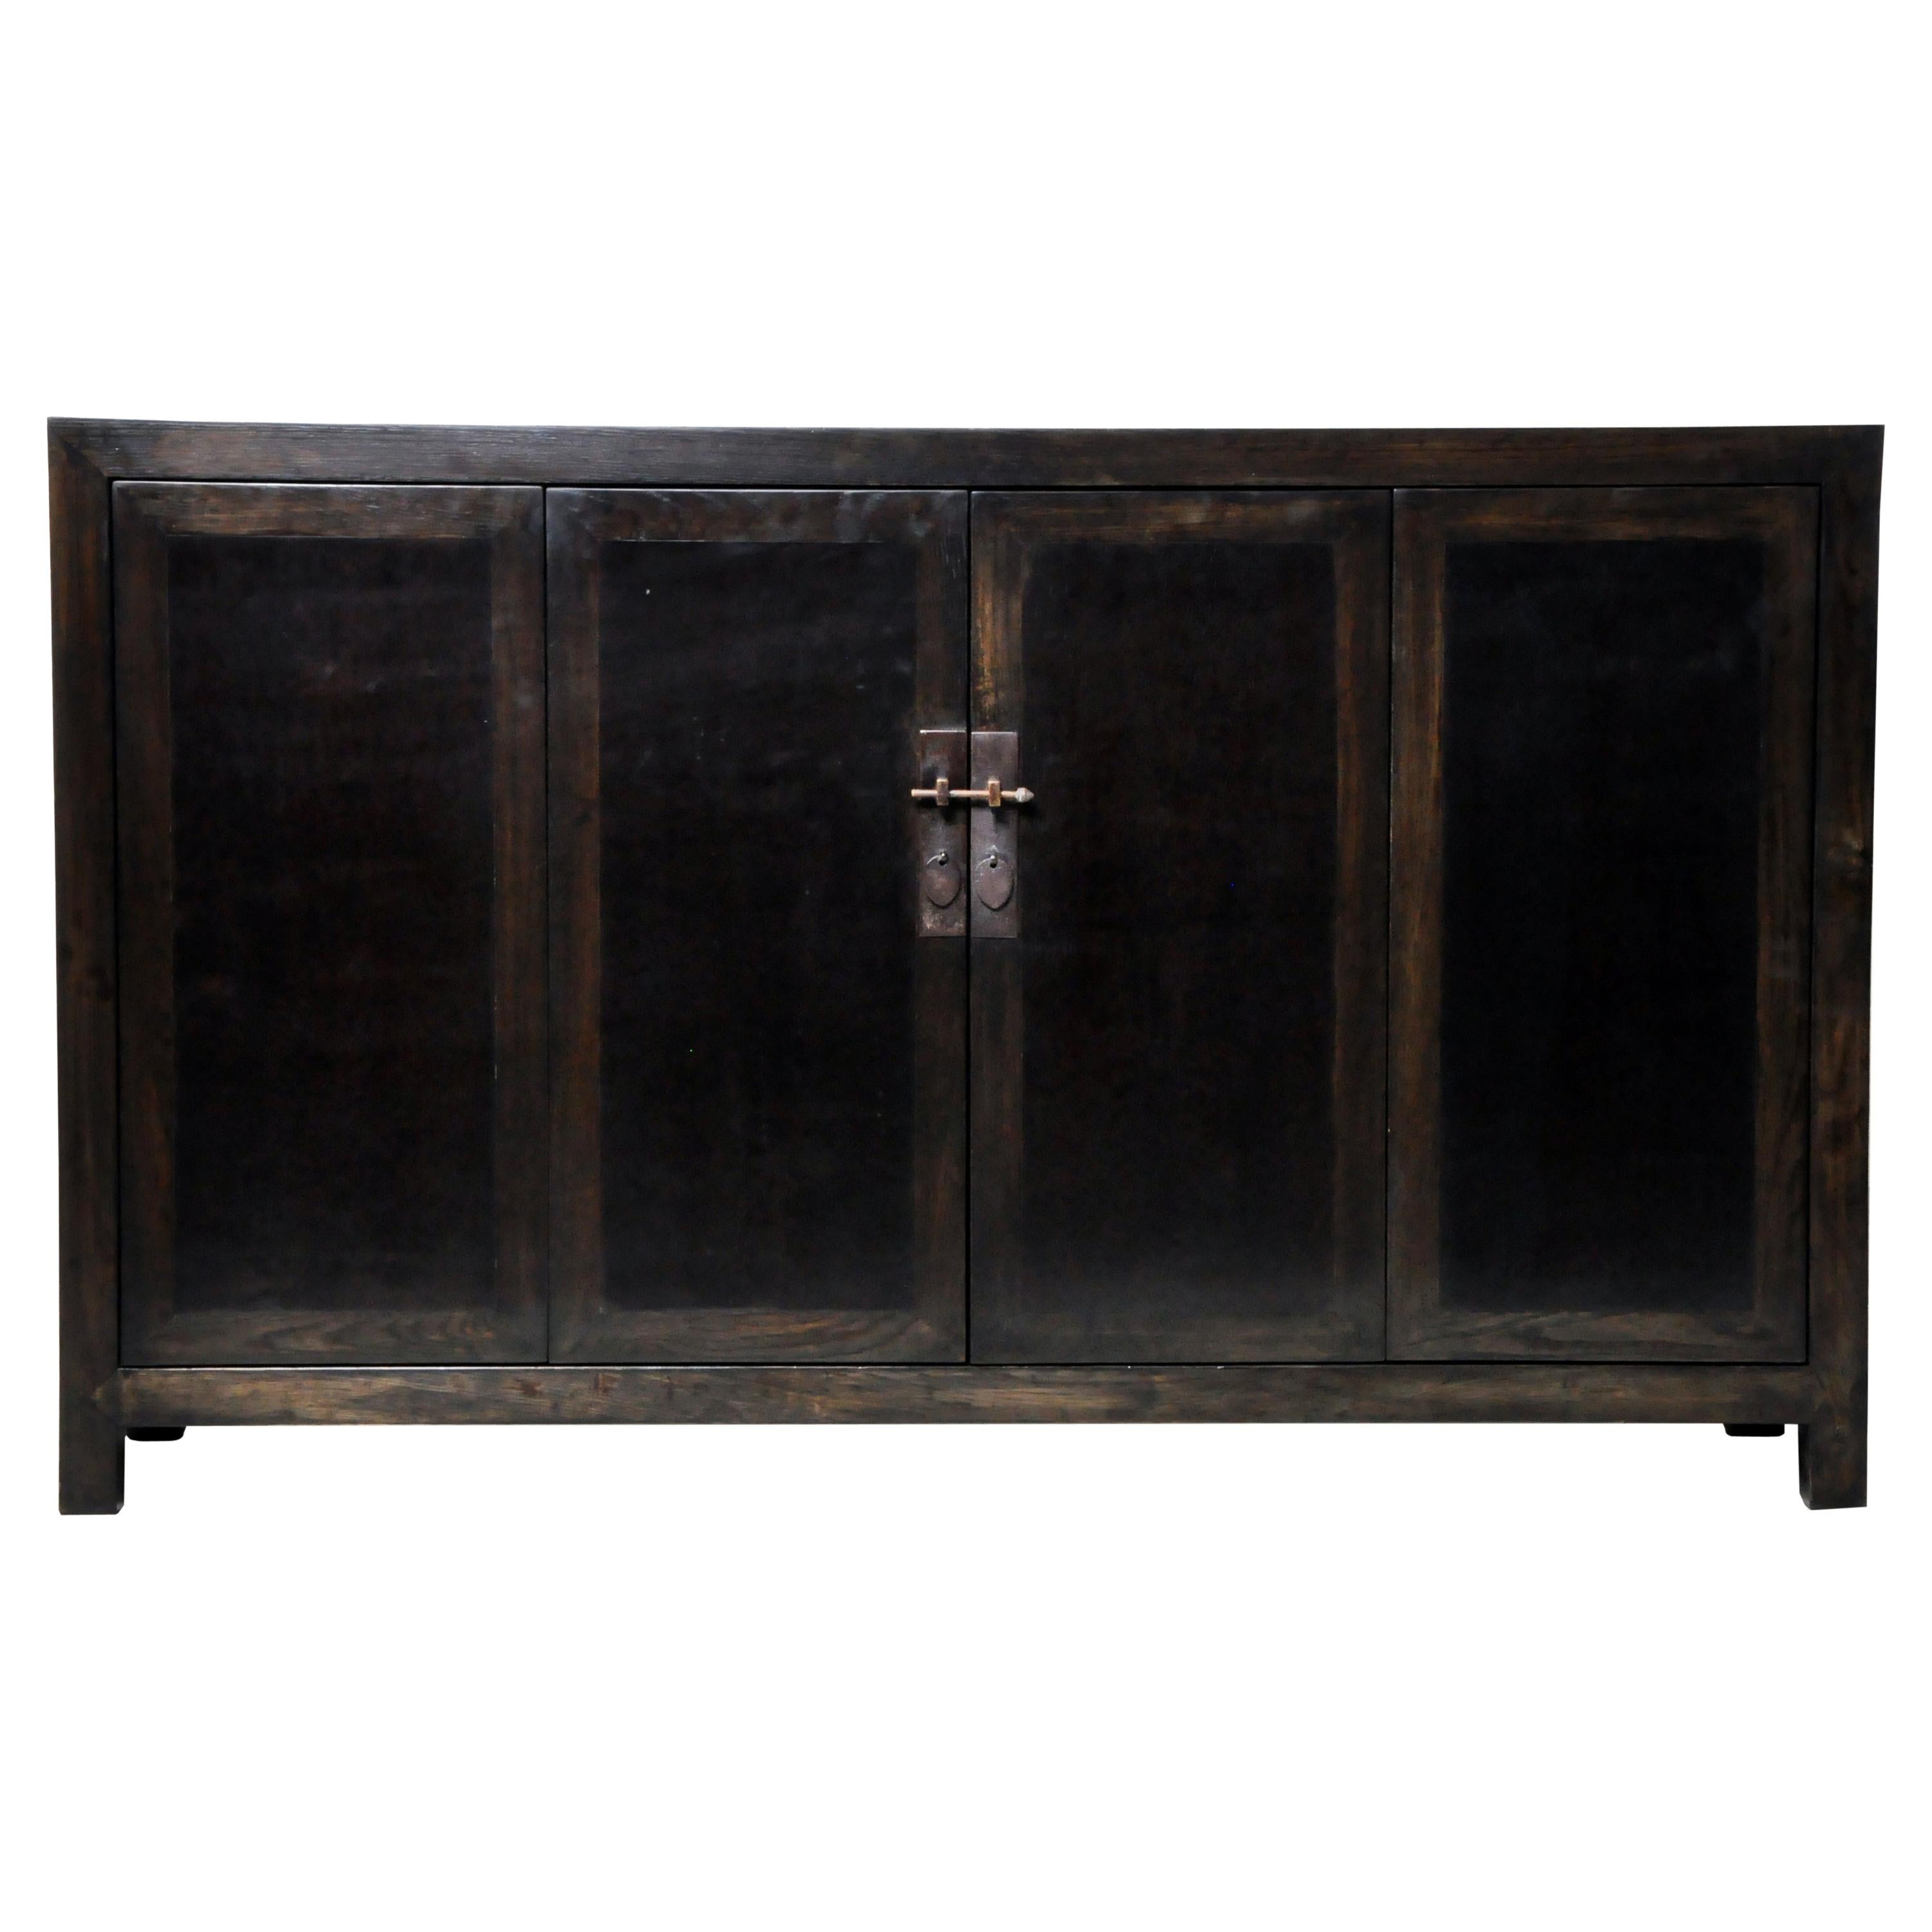 Chinese Sideboard with a Pair of Bi-Fold Doors